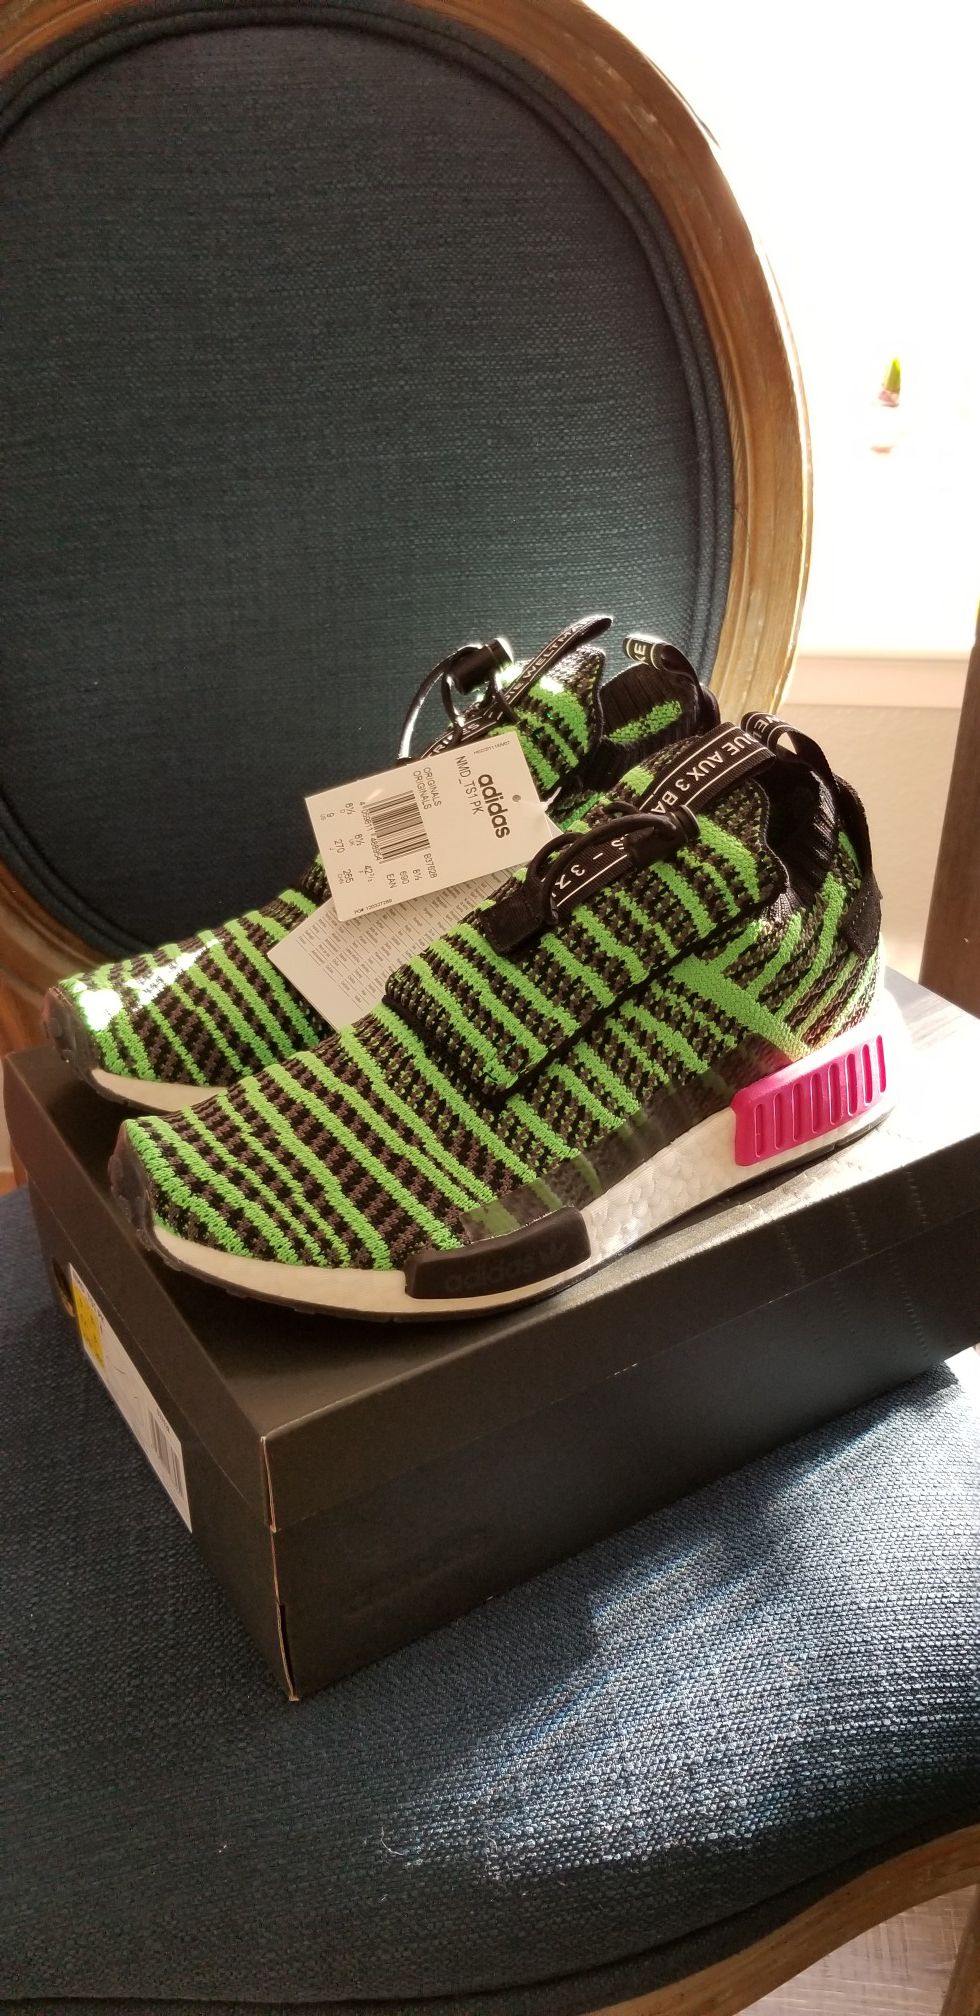 Brand new Authentic Adidas NMD TS1 PK (Green)